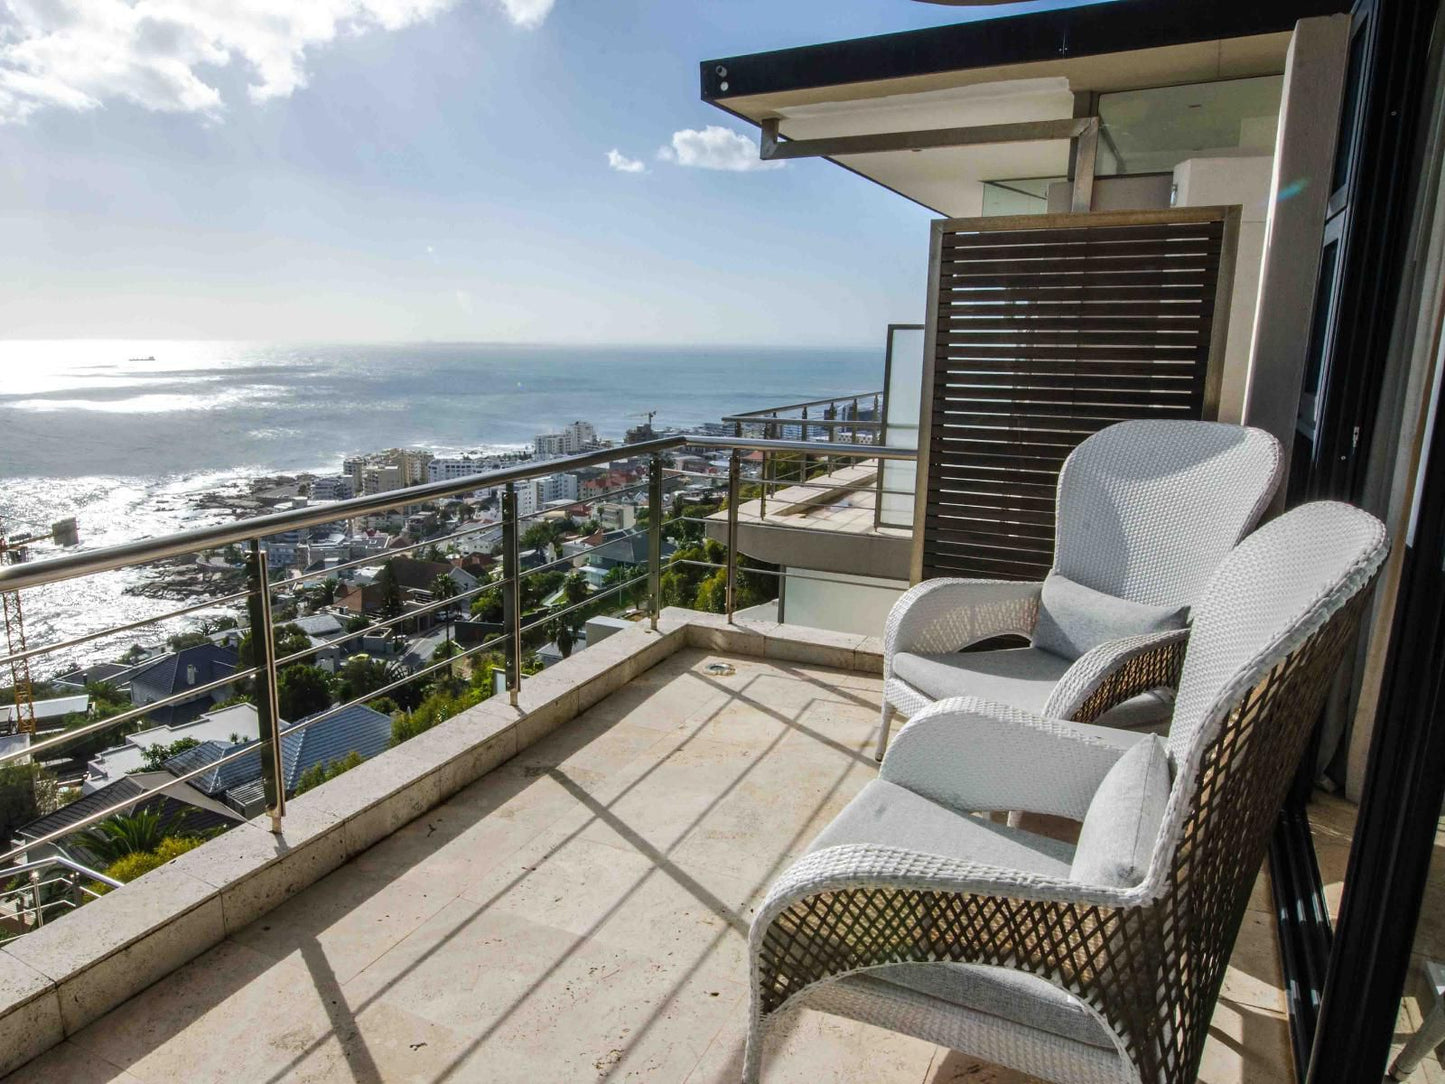 52 De Wet Bantry Bay Cape Town Western Cape South Africa Balcony, Architecture, Beach, Nature, Sand